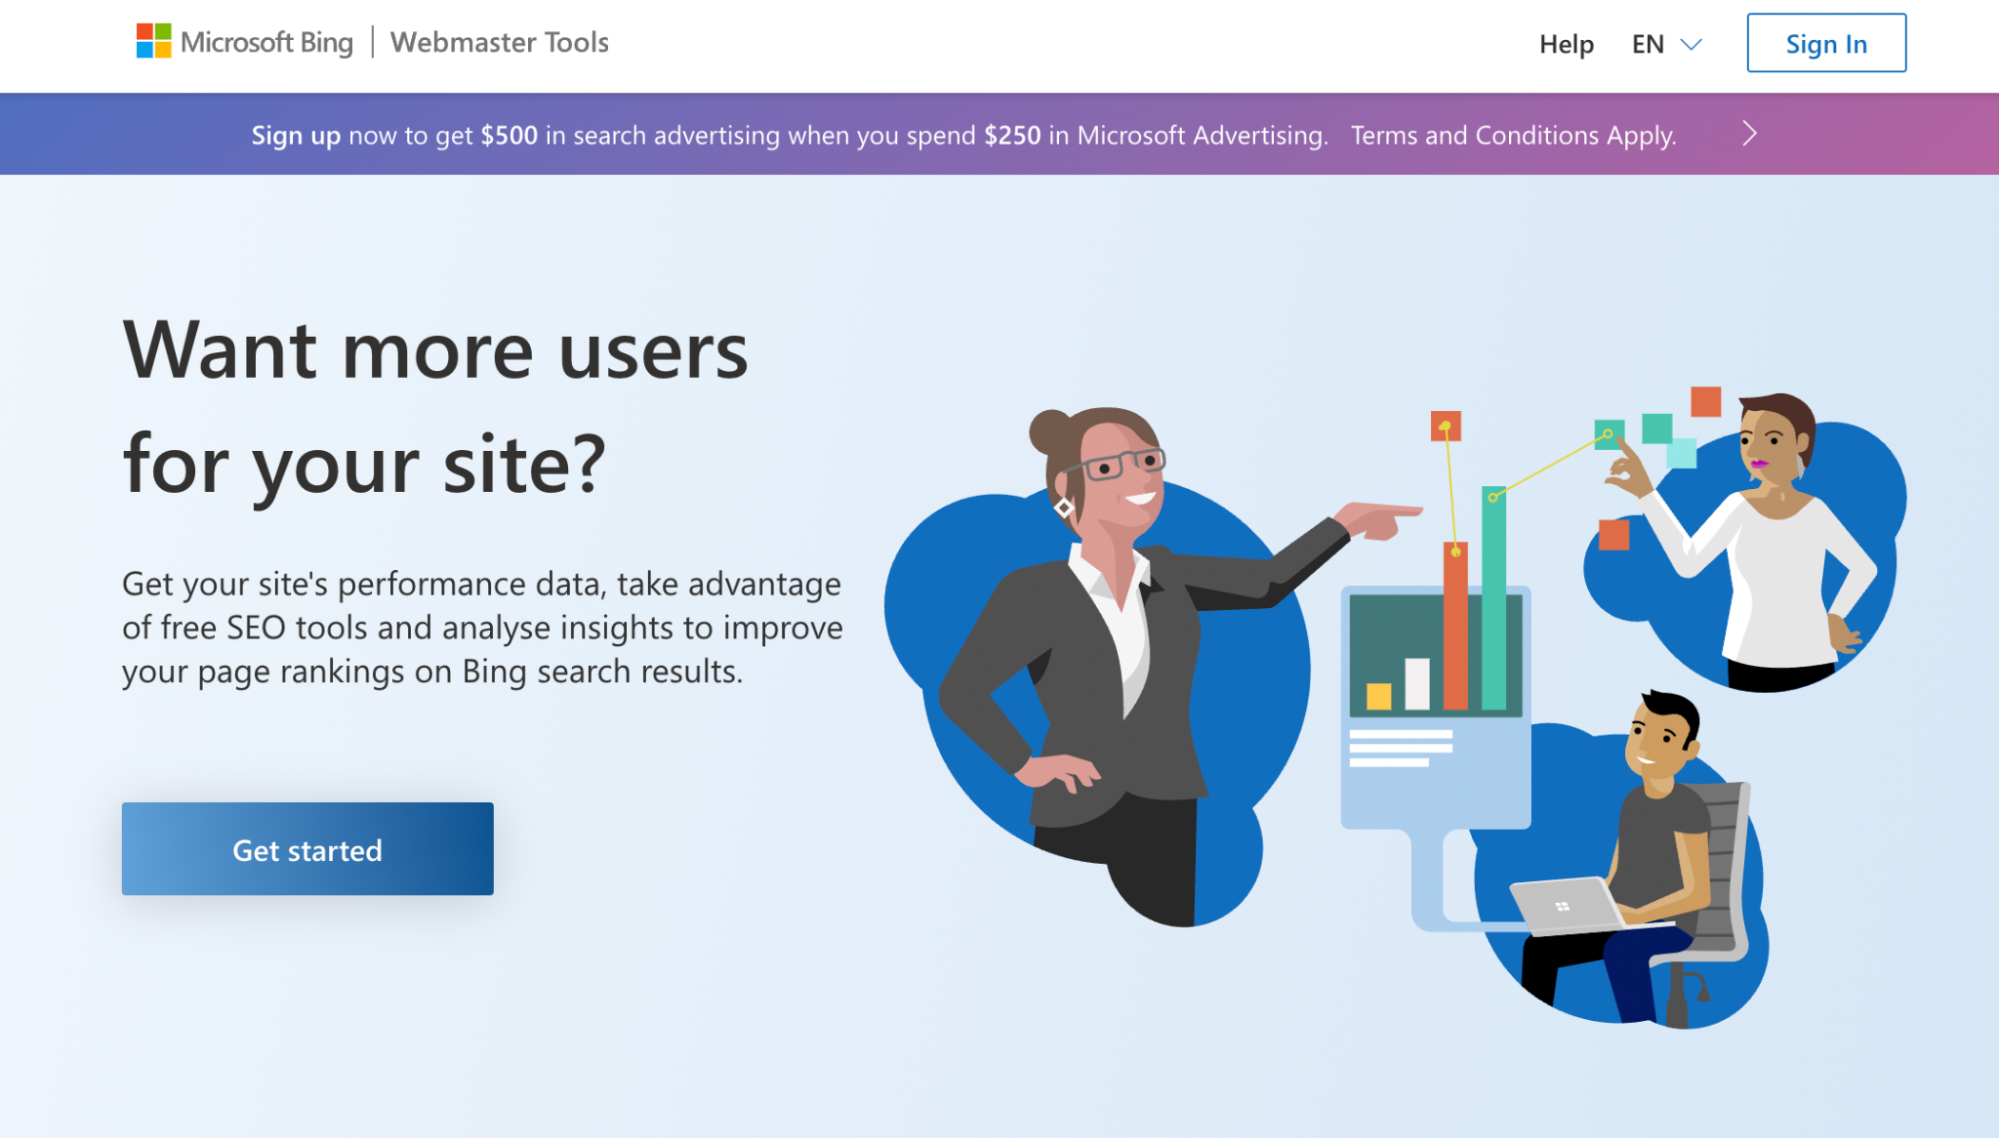 The homepage of Bing’s Webmaster Tools toolbar with a banner featuring illustrated people in office situations